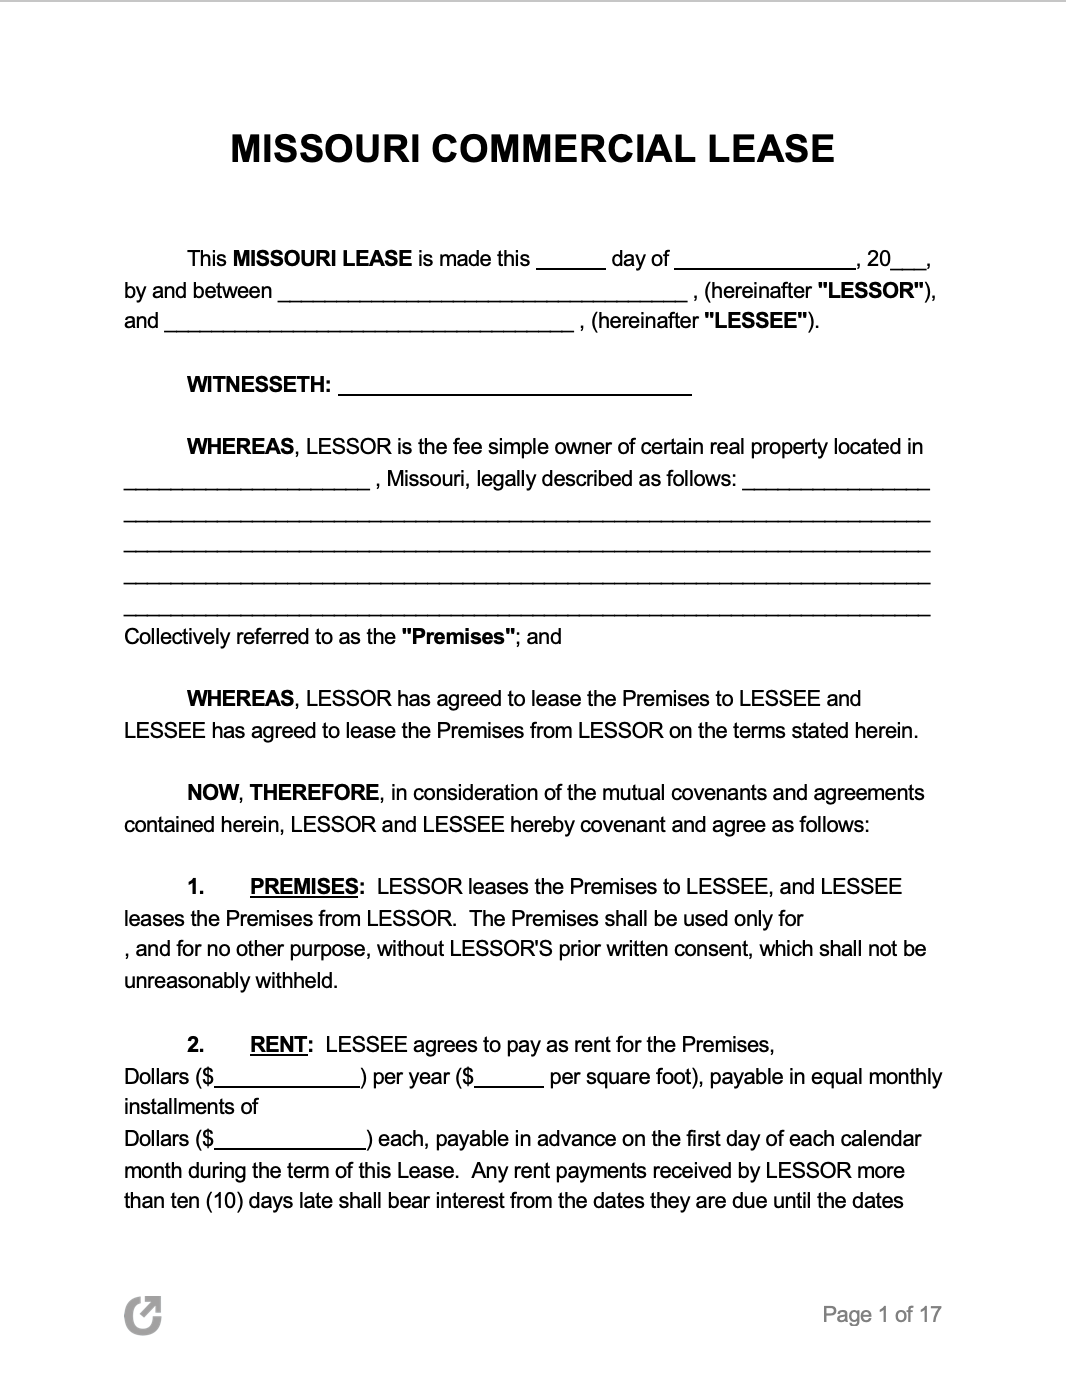 Free Missouri Commercial Lease Agreement  PDF  WORD For free printable commercial lease agreement template